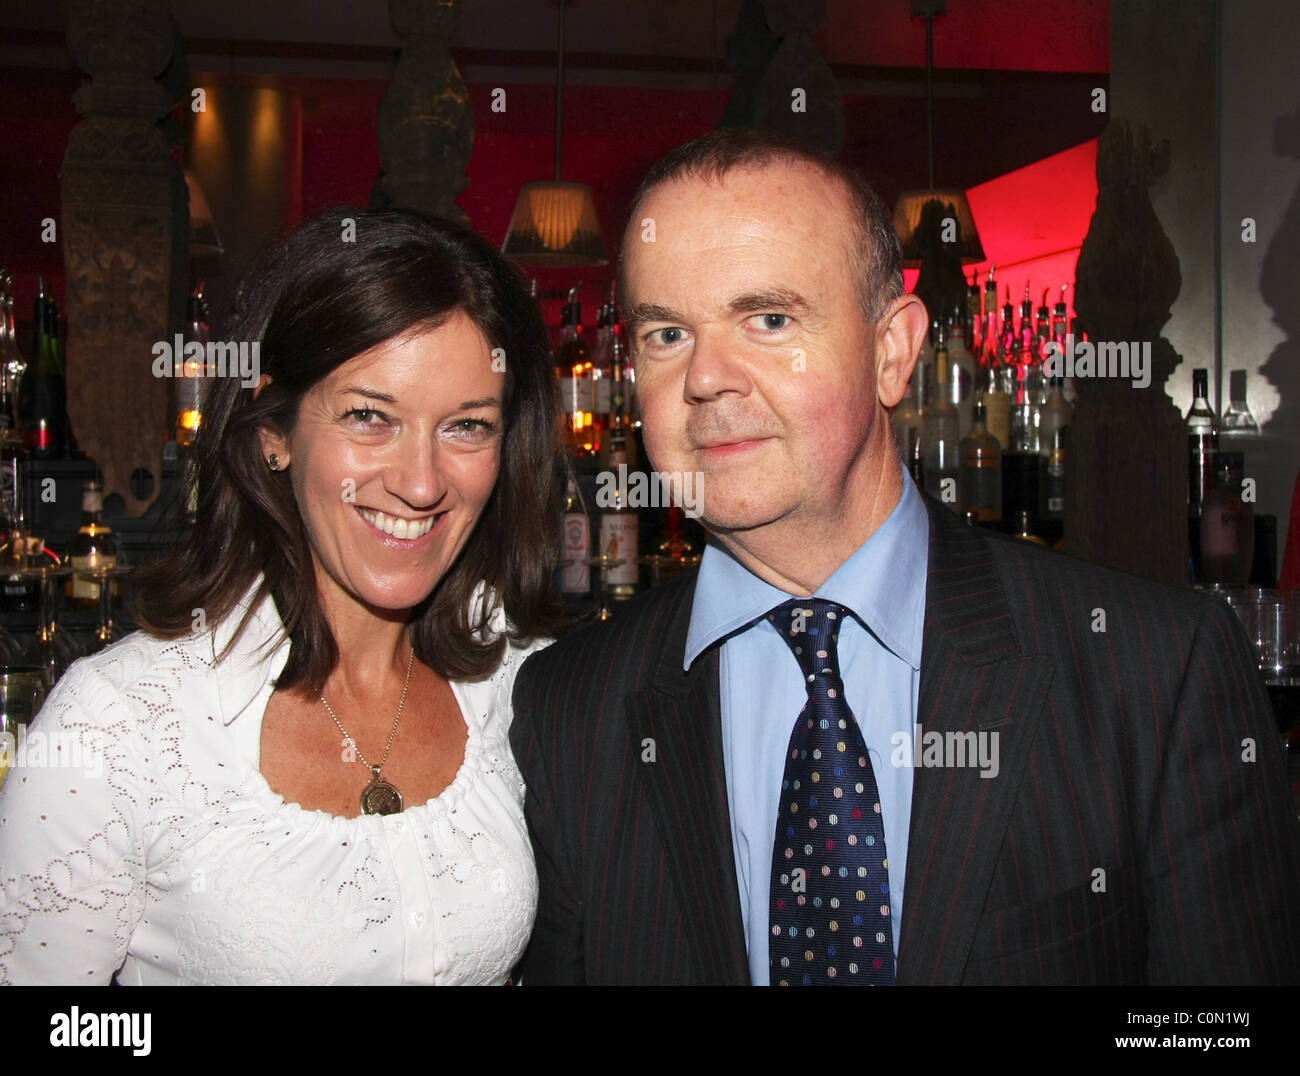 Victoria Hislop and Ian Hislop attend the Kathy Lette Book Launch 'To Love Honour and Betray' held at the Haymarket Hotel. Stock Photo